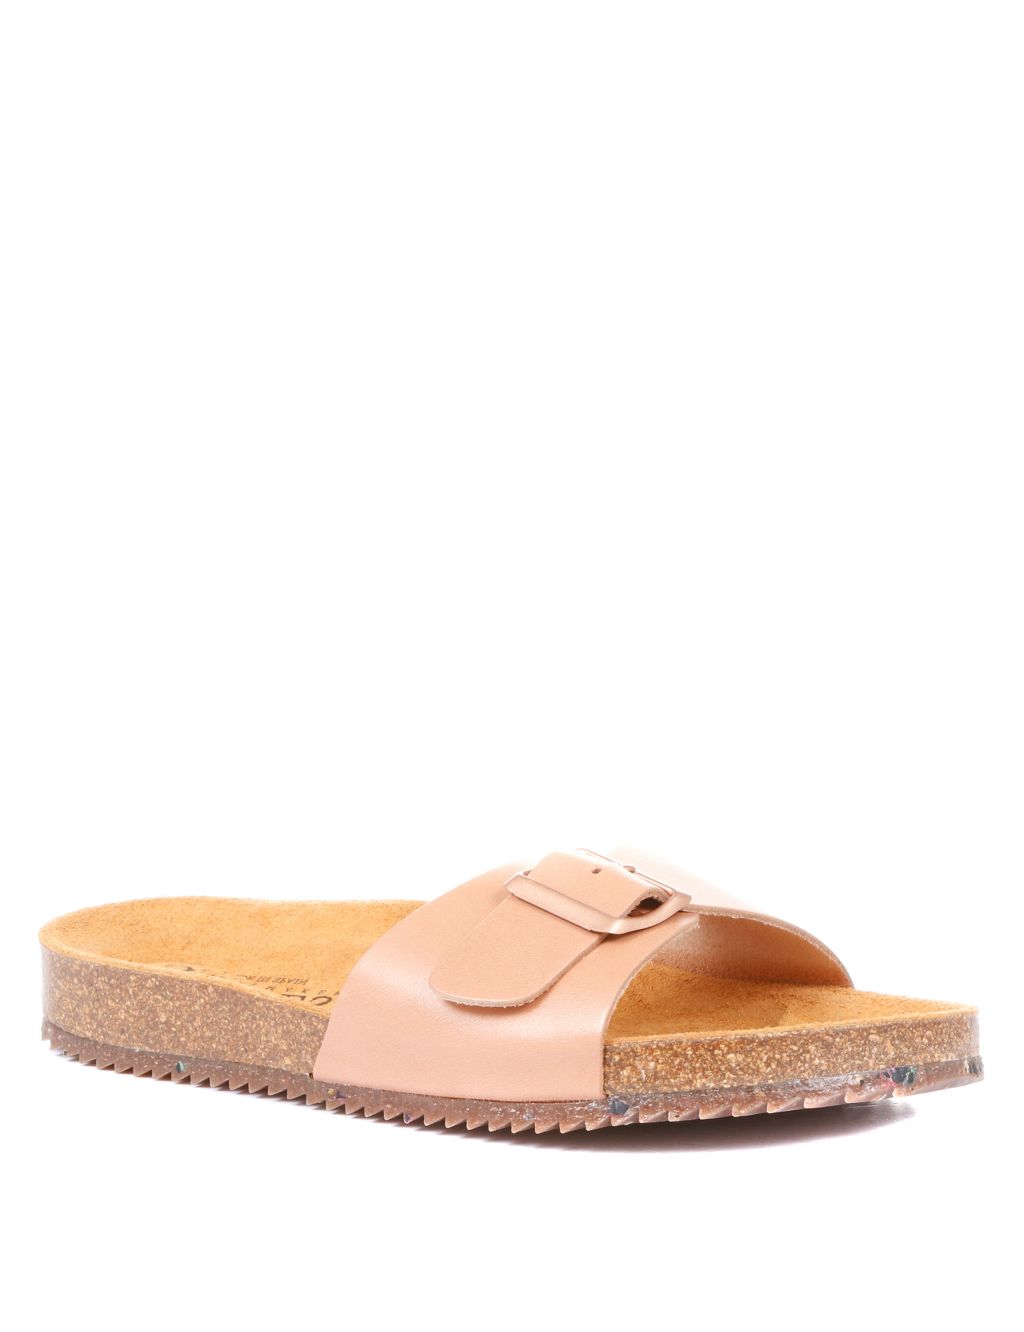 Leather Buckle Flat Mules image 2